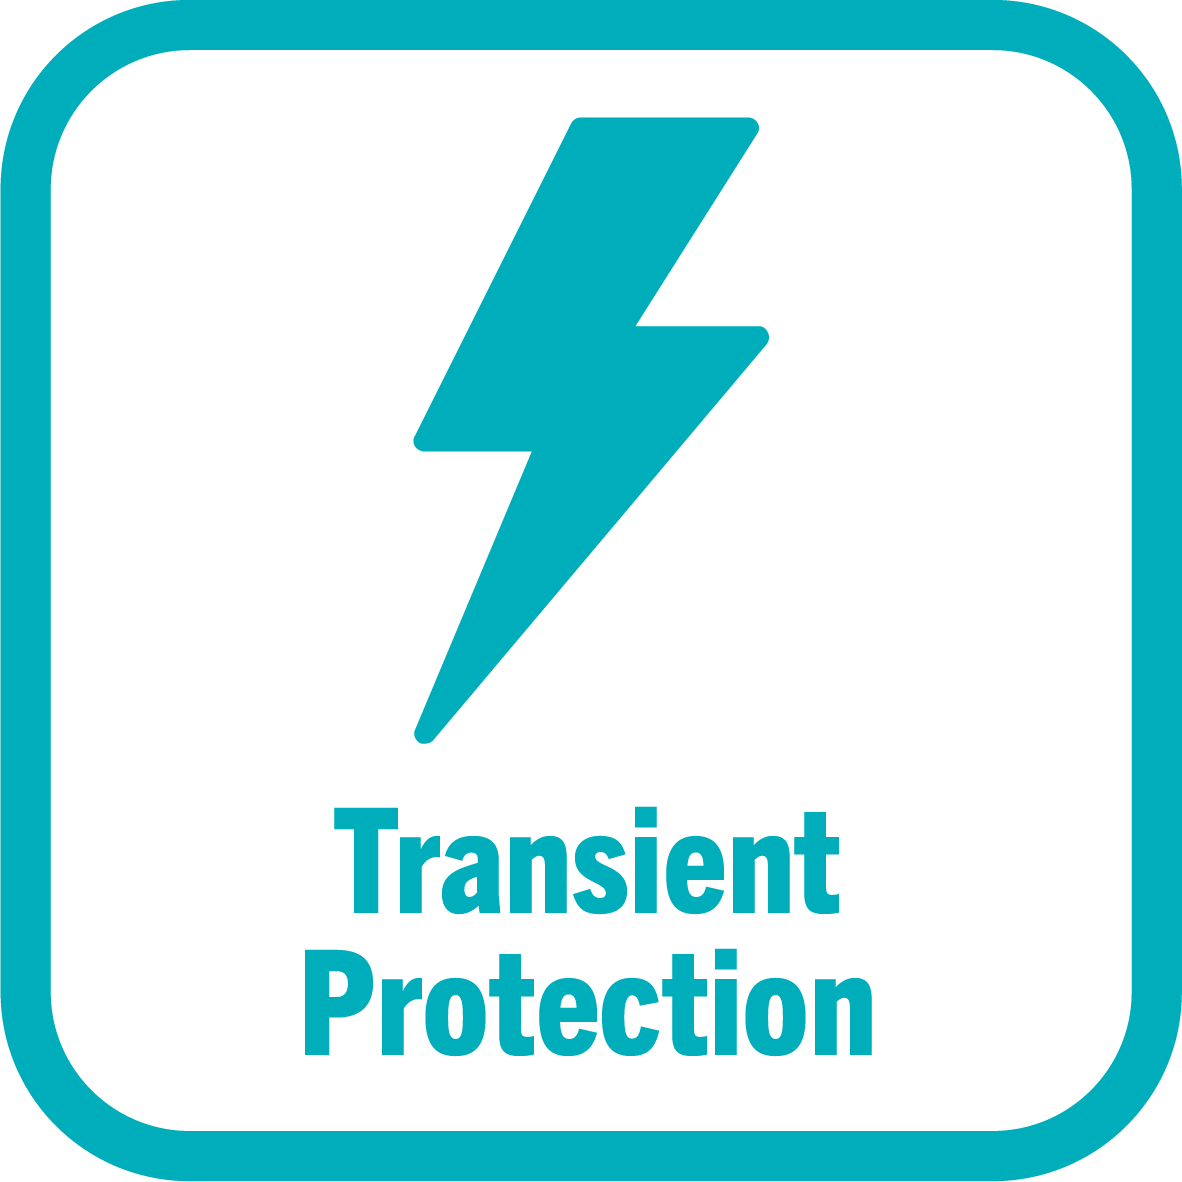 Transient Protection